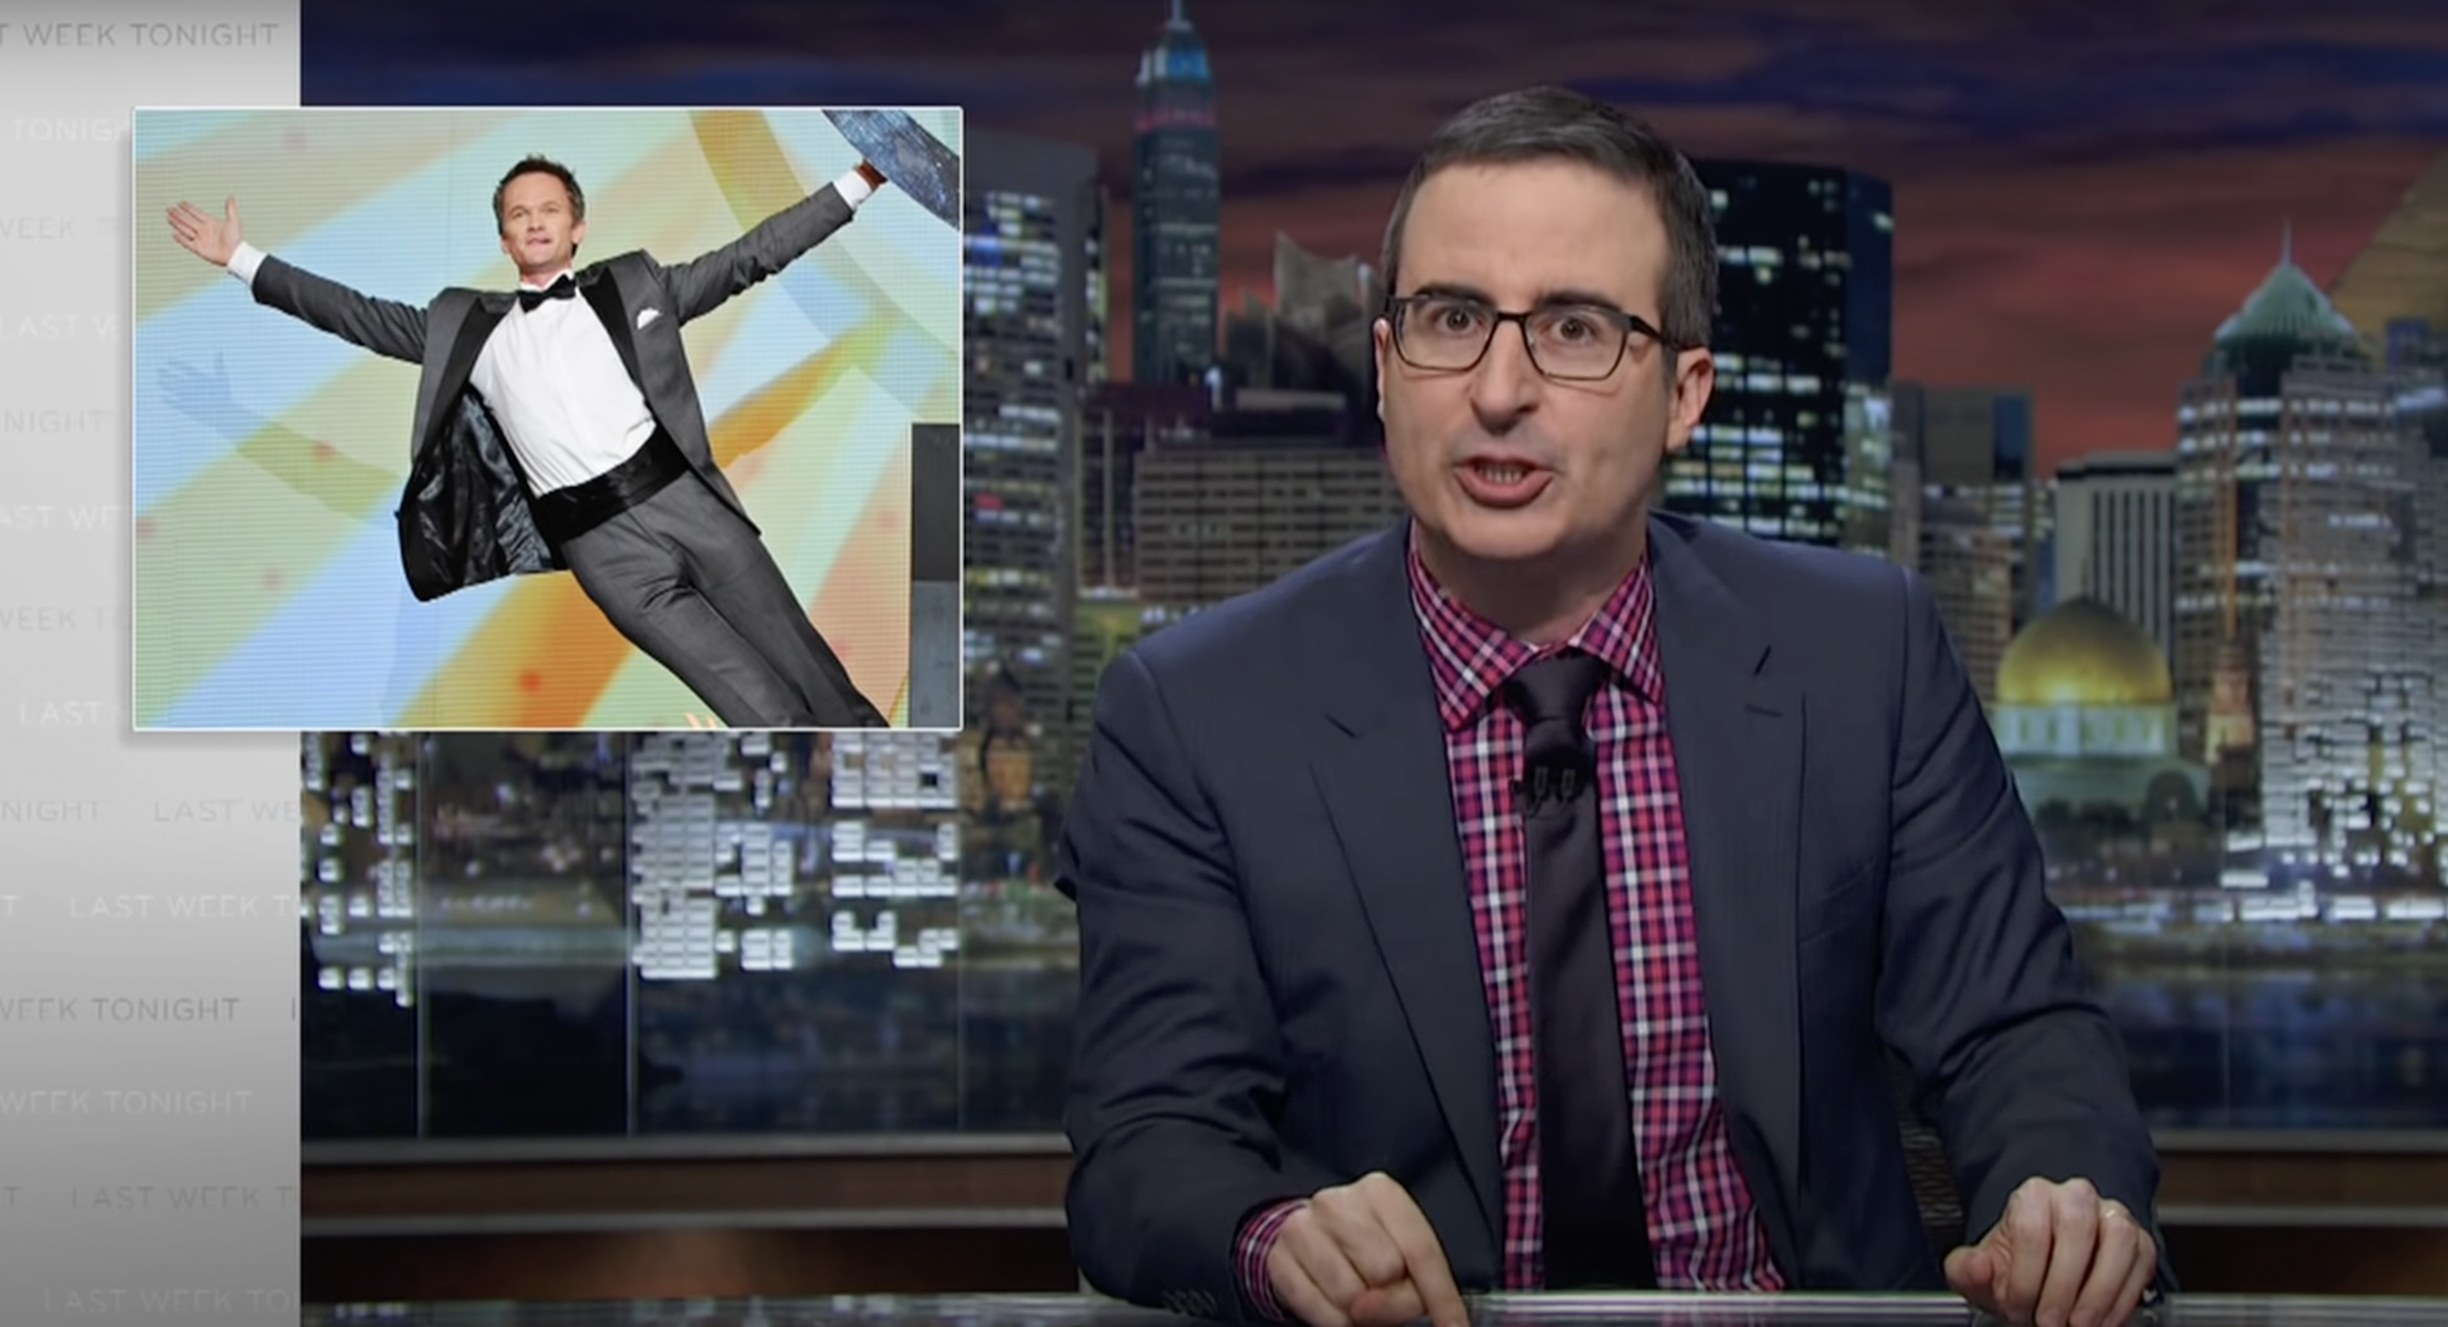 John Oliver at his desk passionately talking, with an image of Neil Patrick Harris next to him